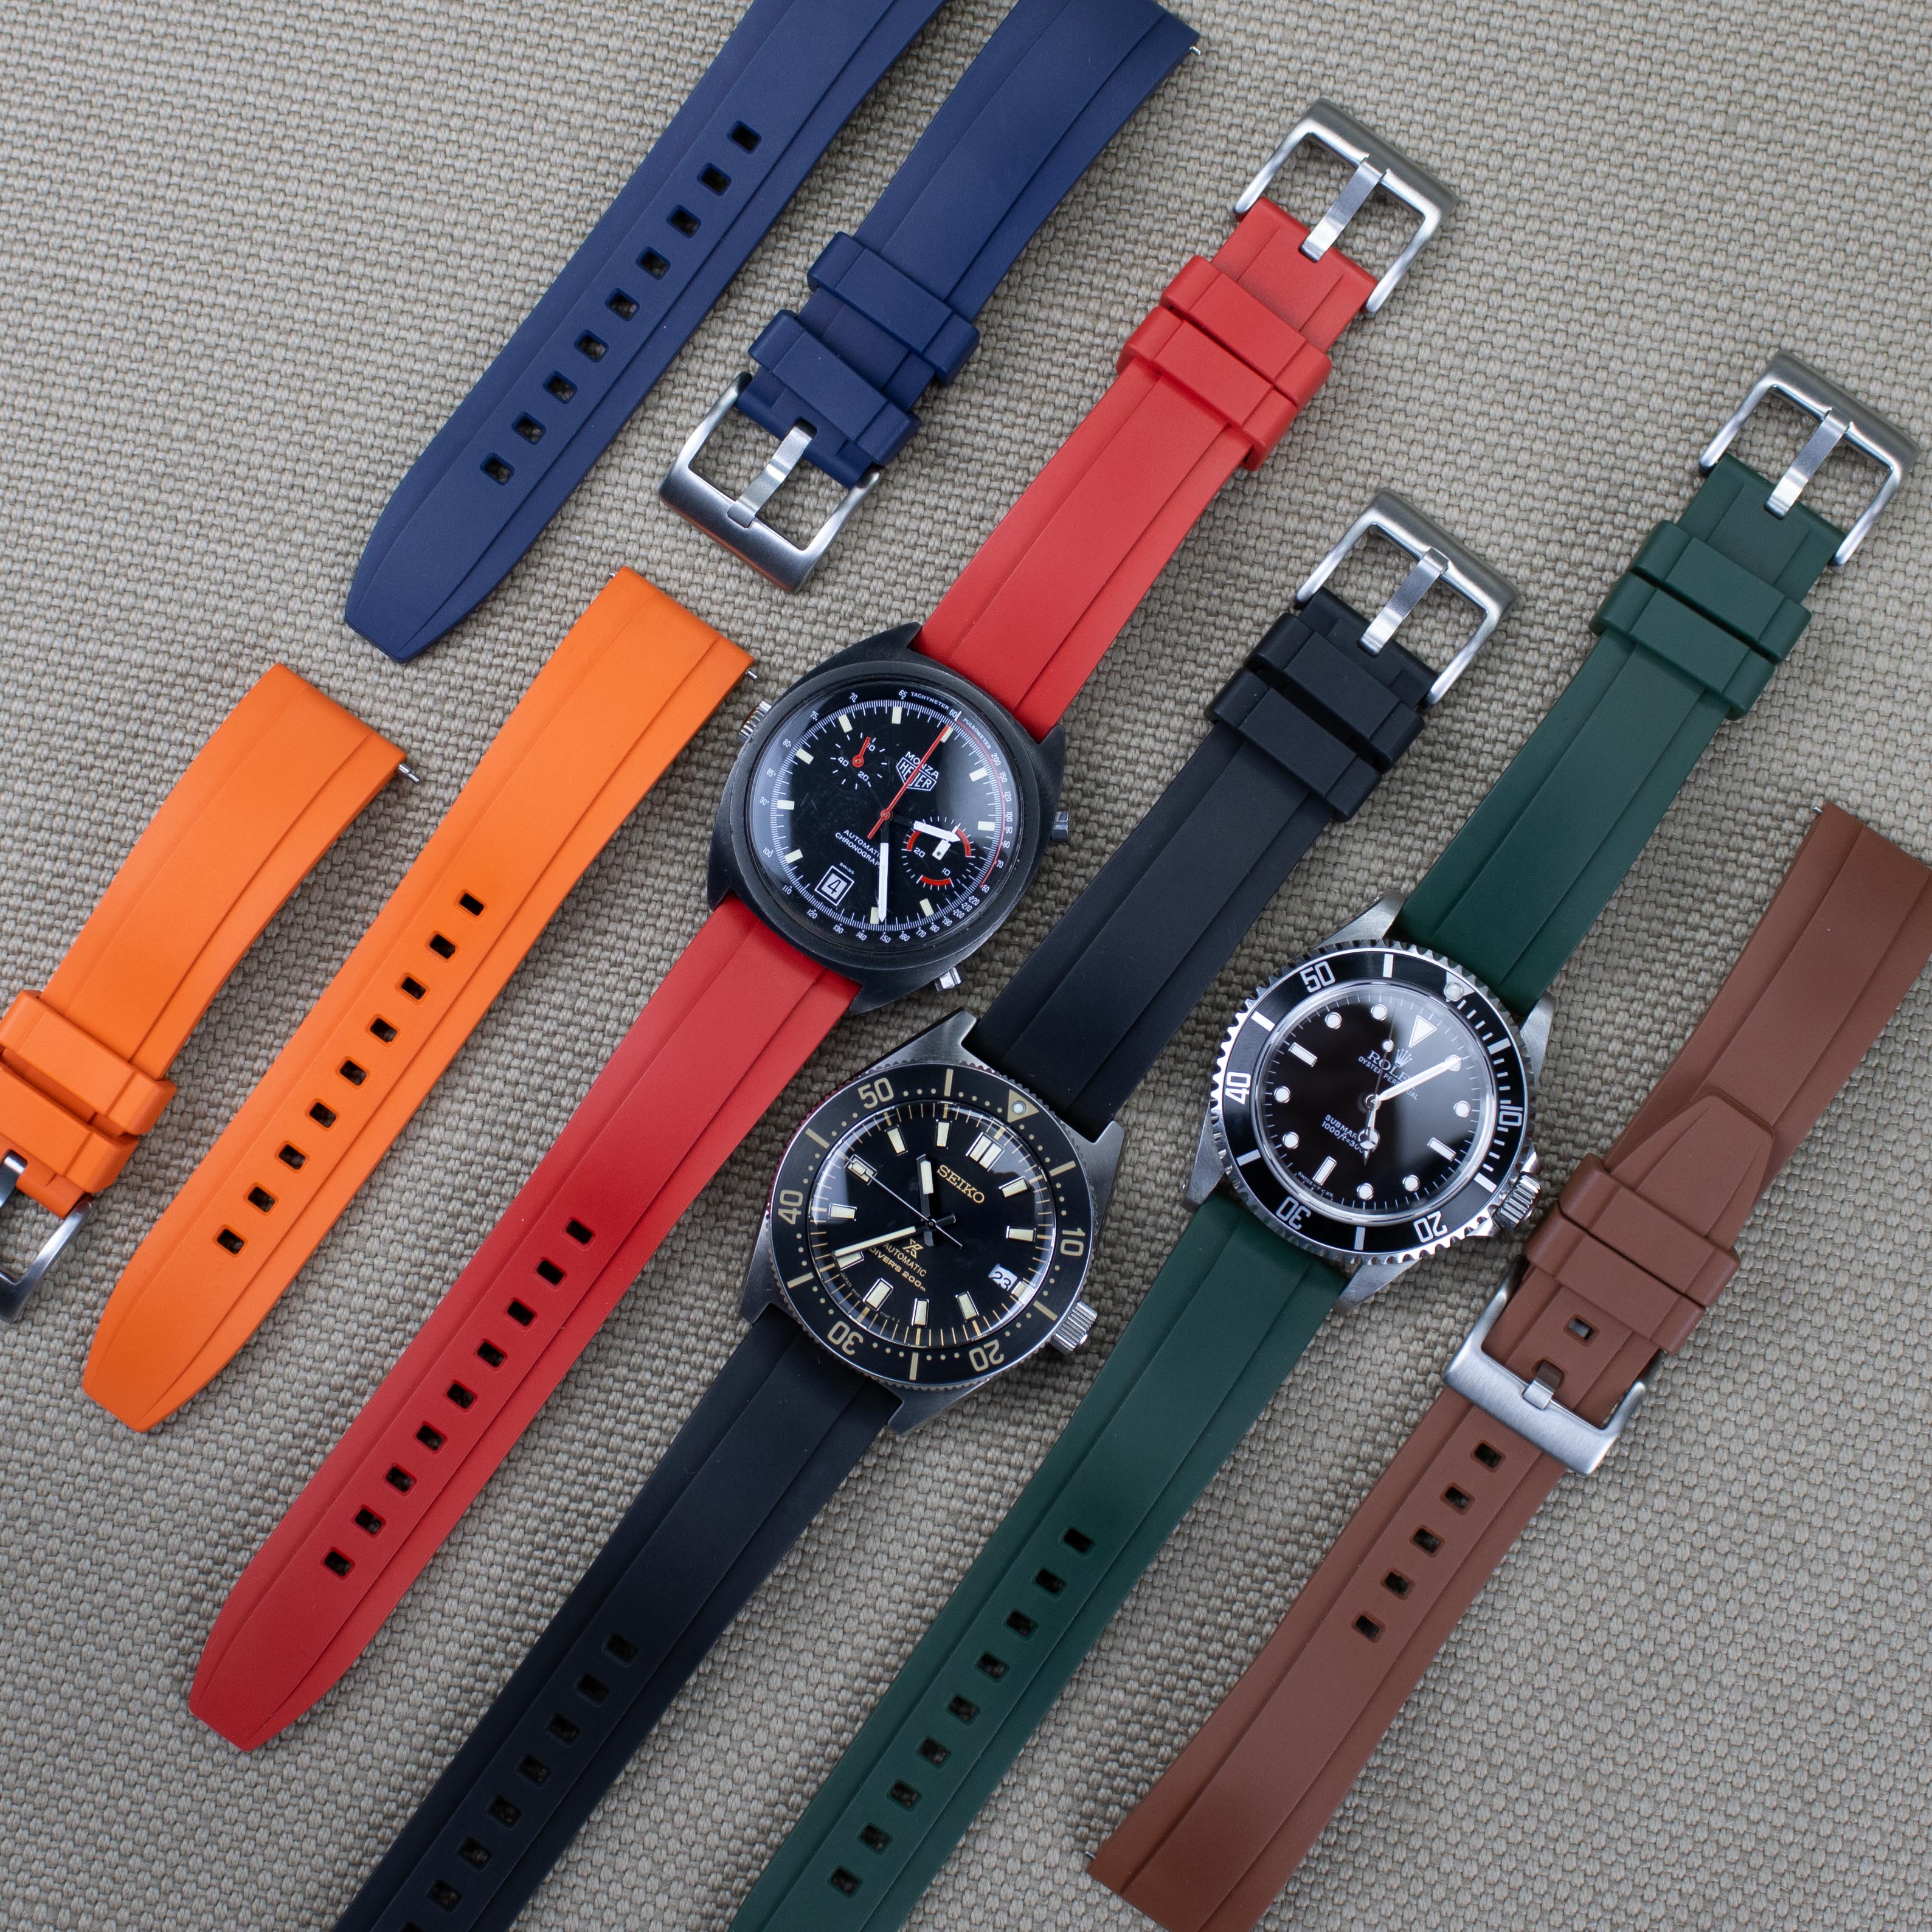 Rubber watch bands